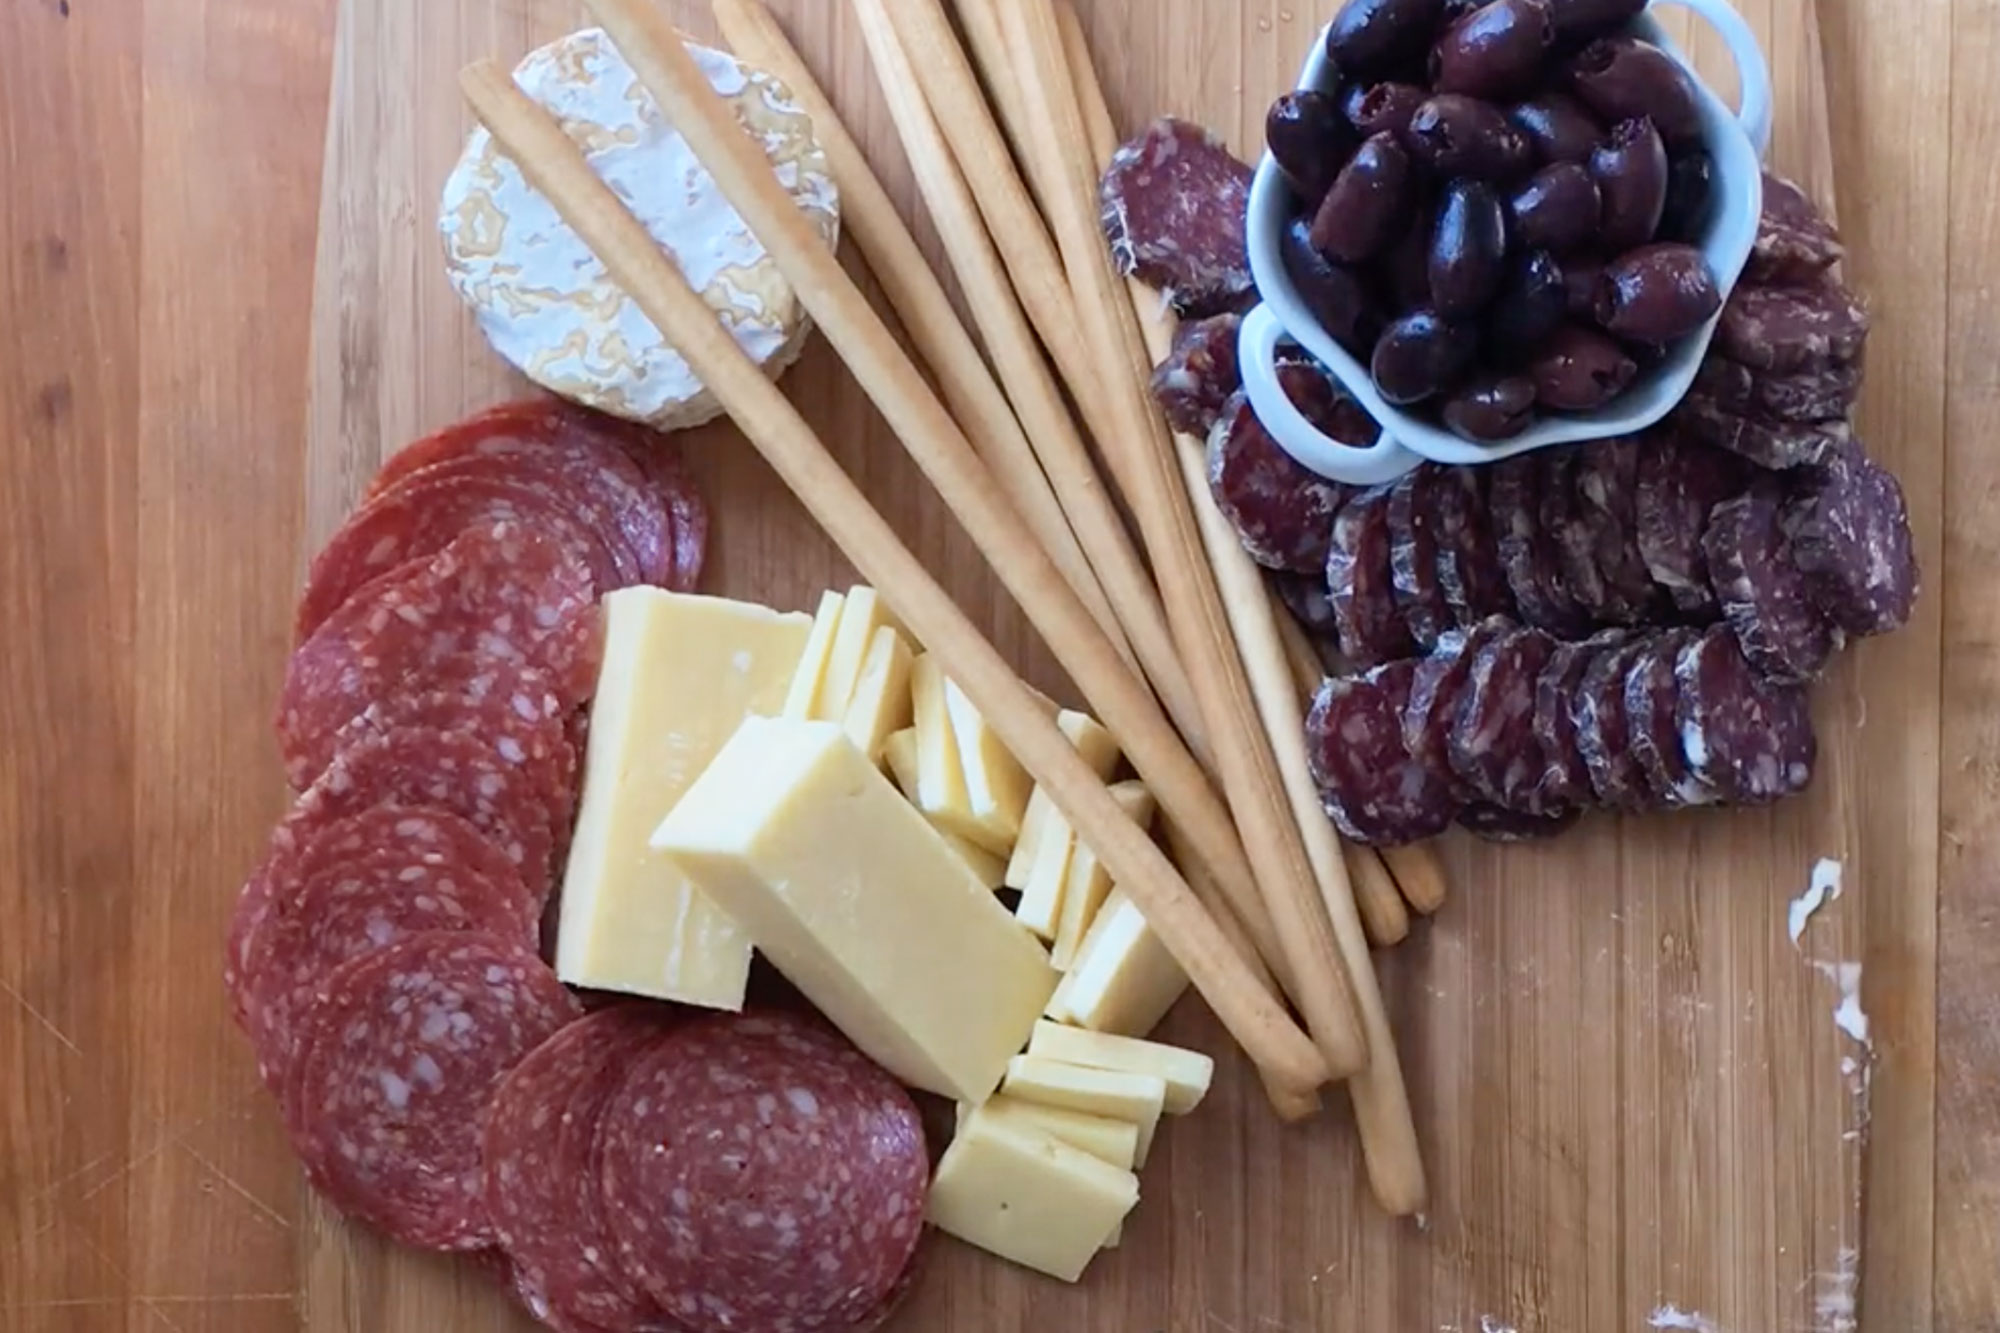 Make your own charcuterie plate